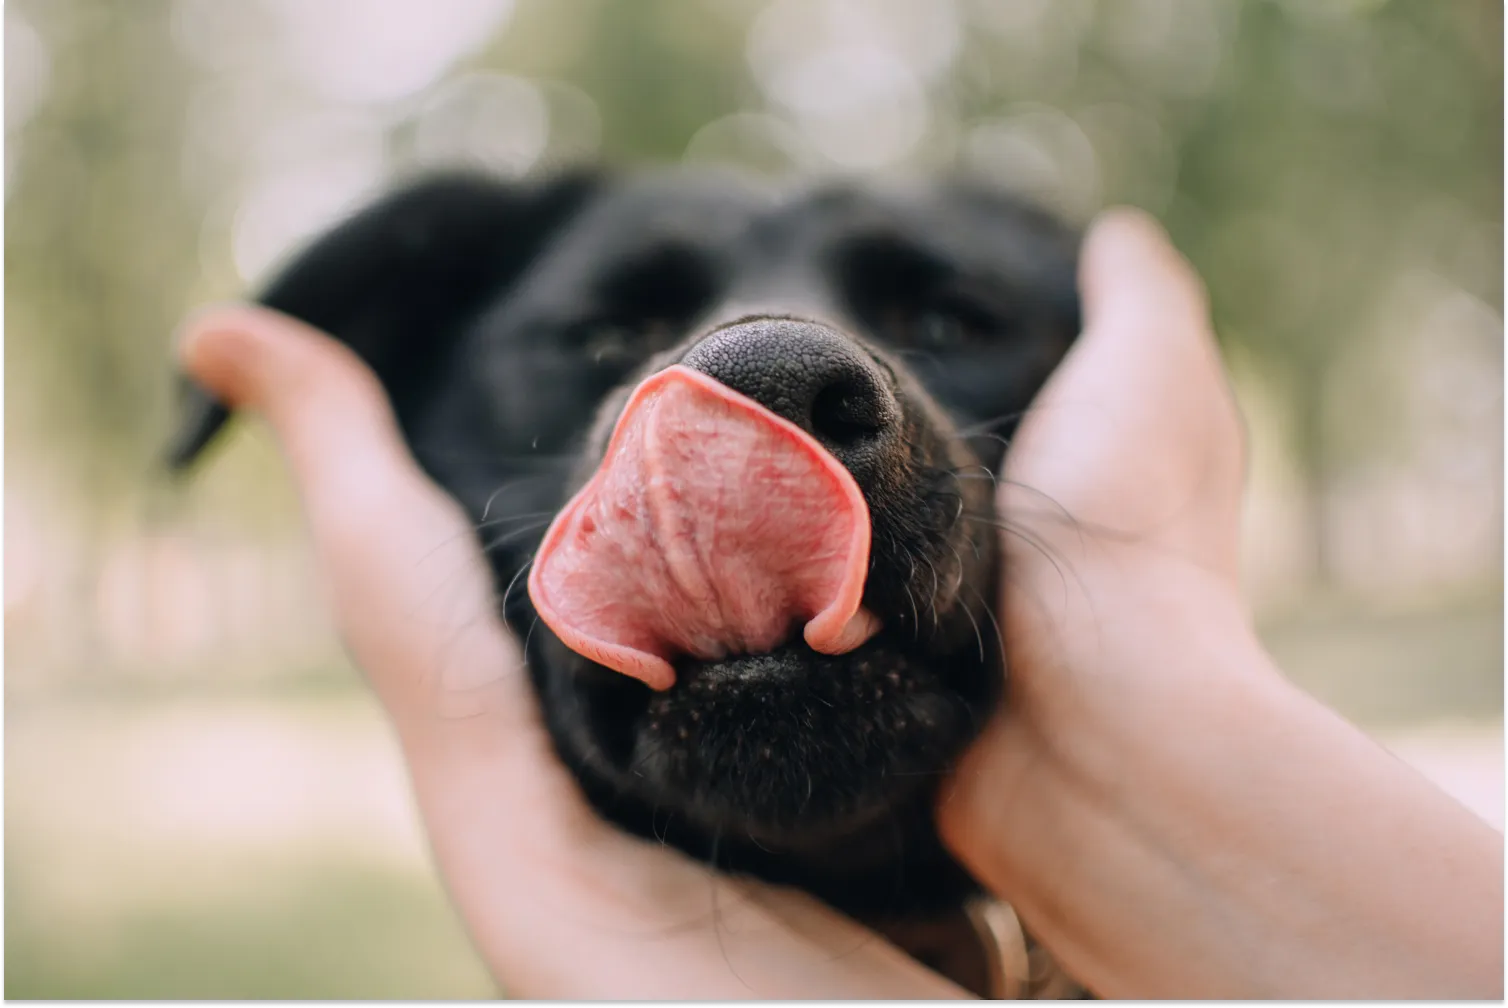 Why Does My Dog Lick Me?